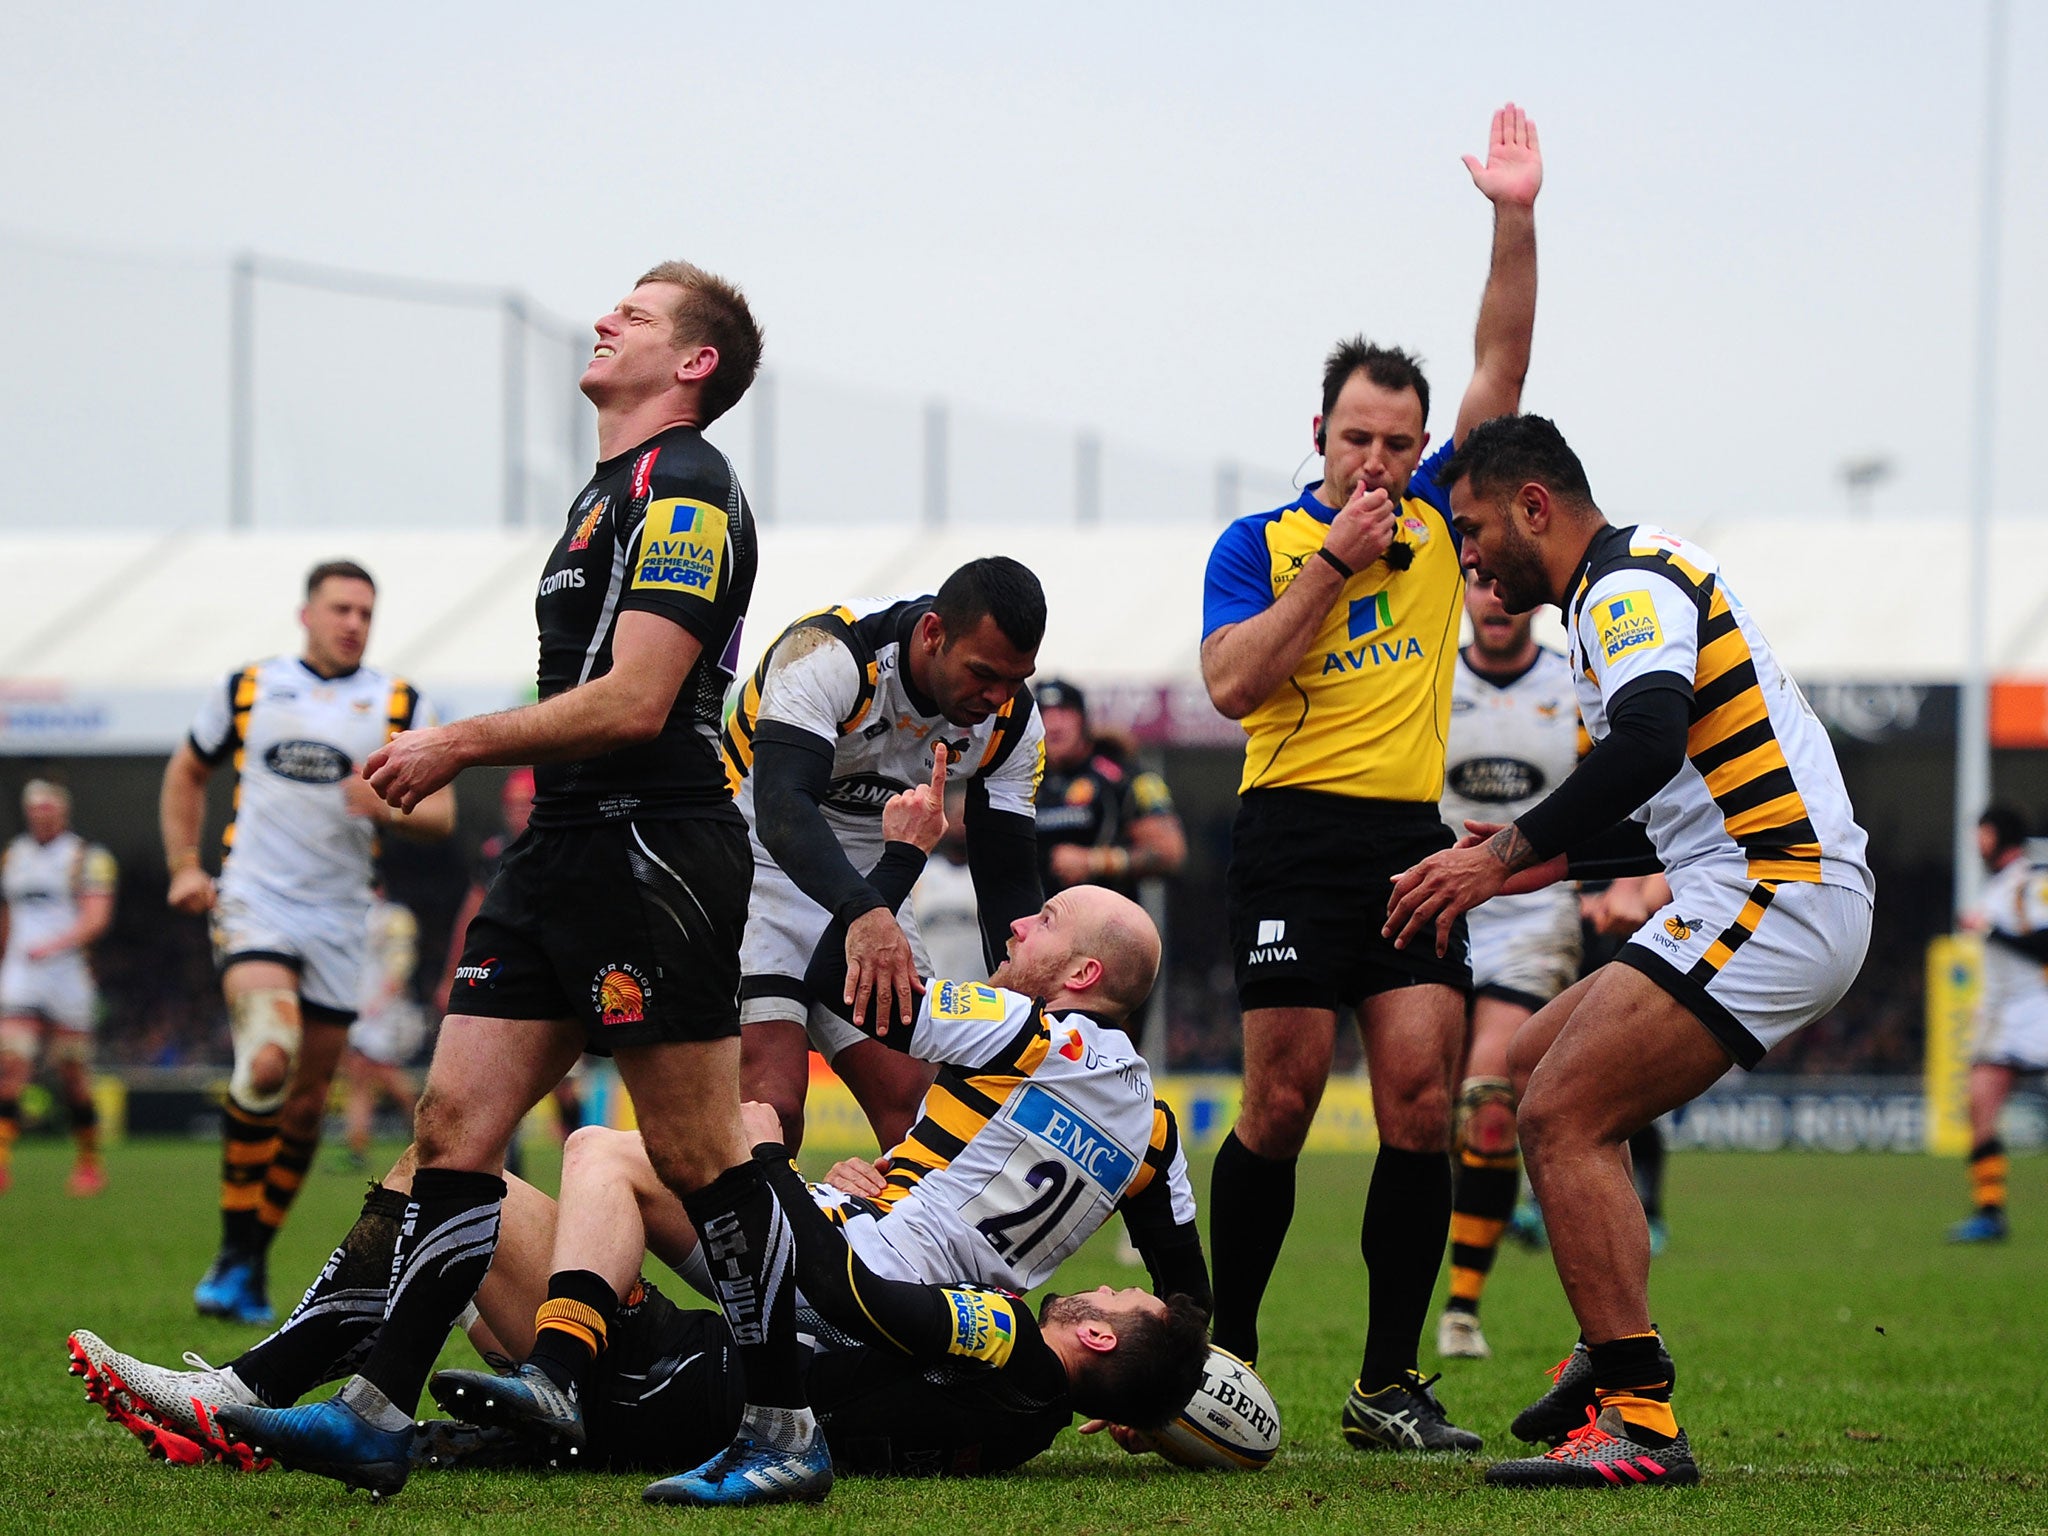 Joe Simpson scores a try to level the scores